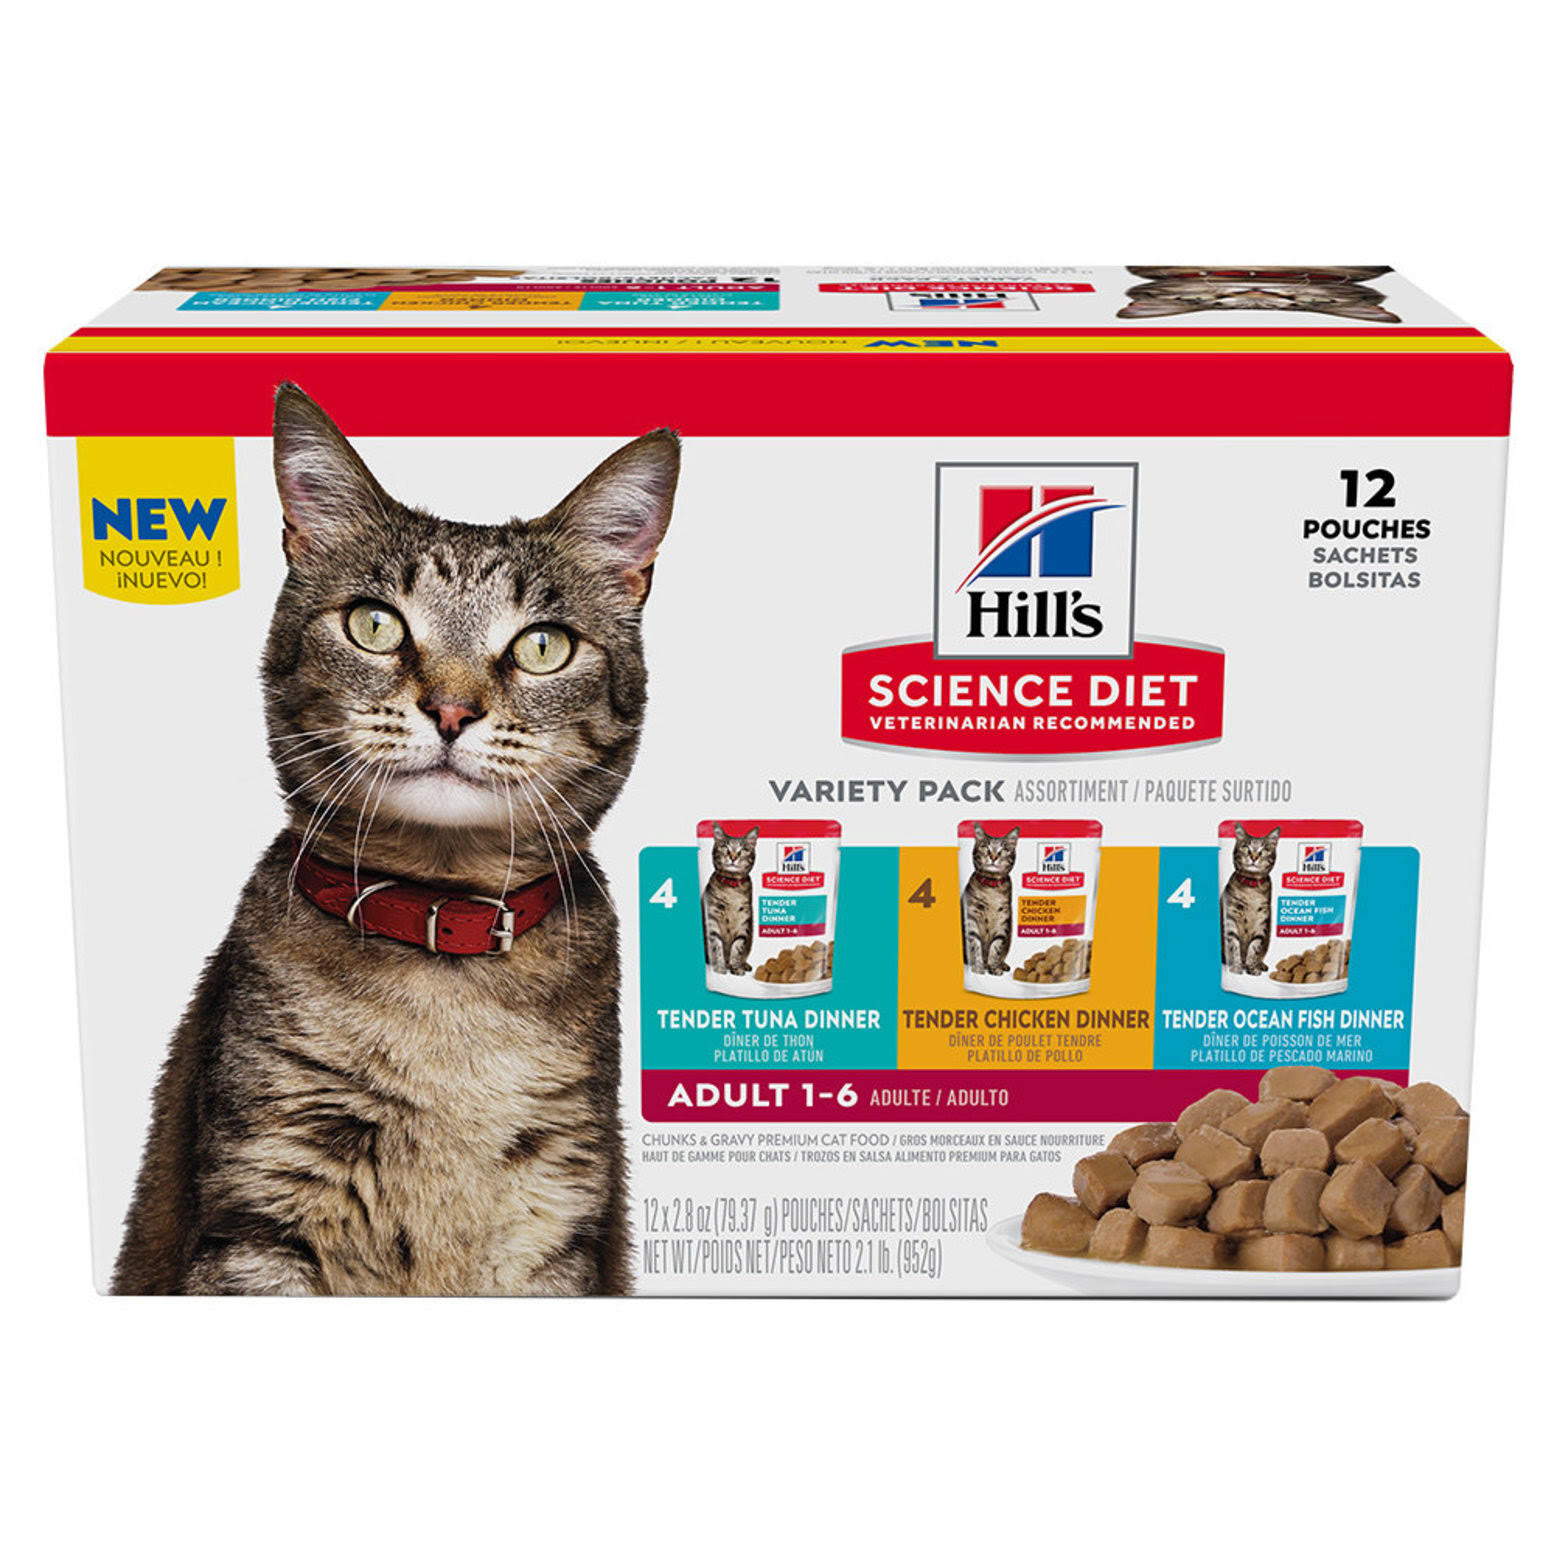 Hill's Science Diet Wet Cat Food Pouches Variety Adult 12 Count (Pack of 1)